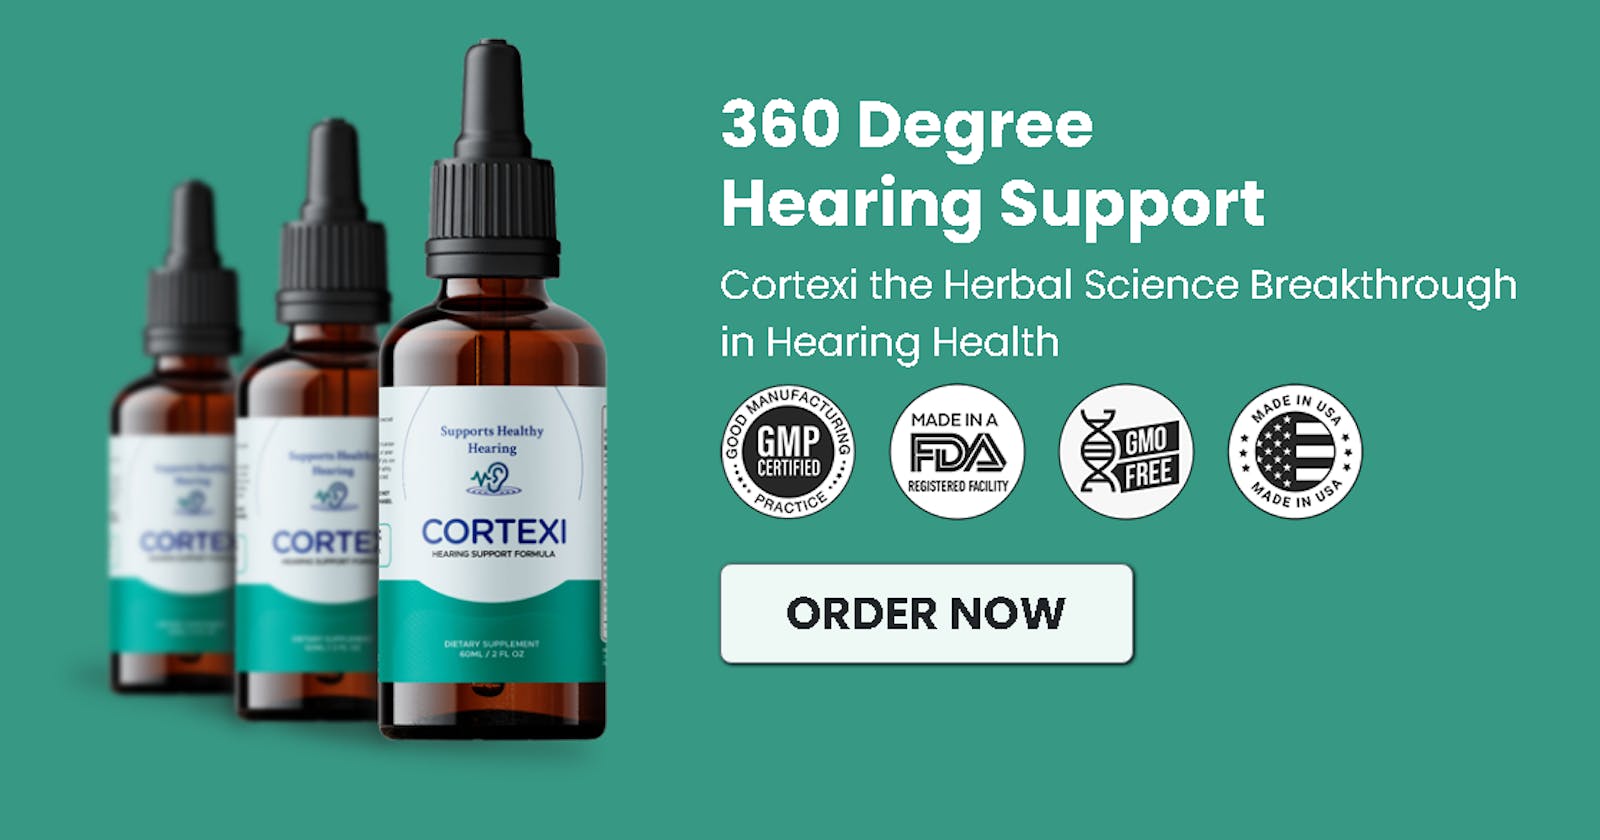 Cortexi Australia (Review) Strengthens Memory & Supports Healthy Hearing! Read